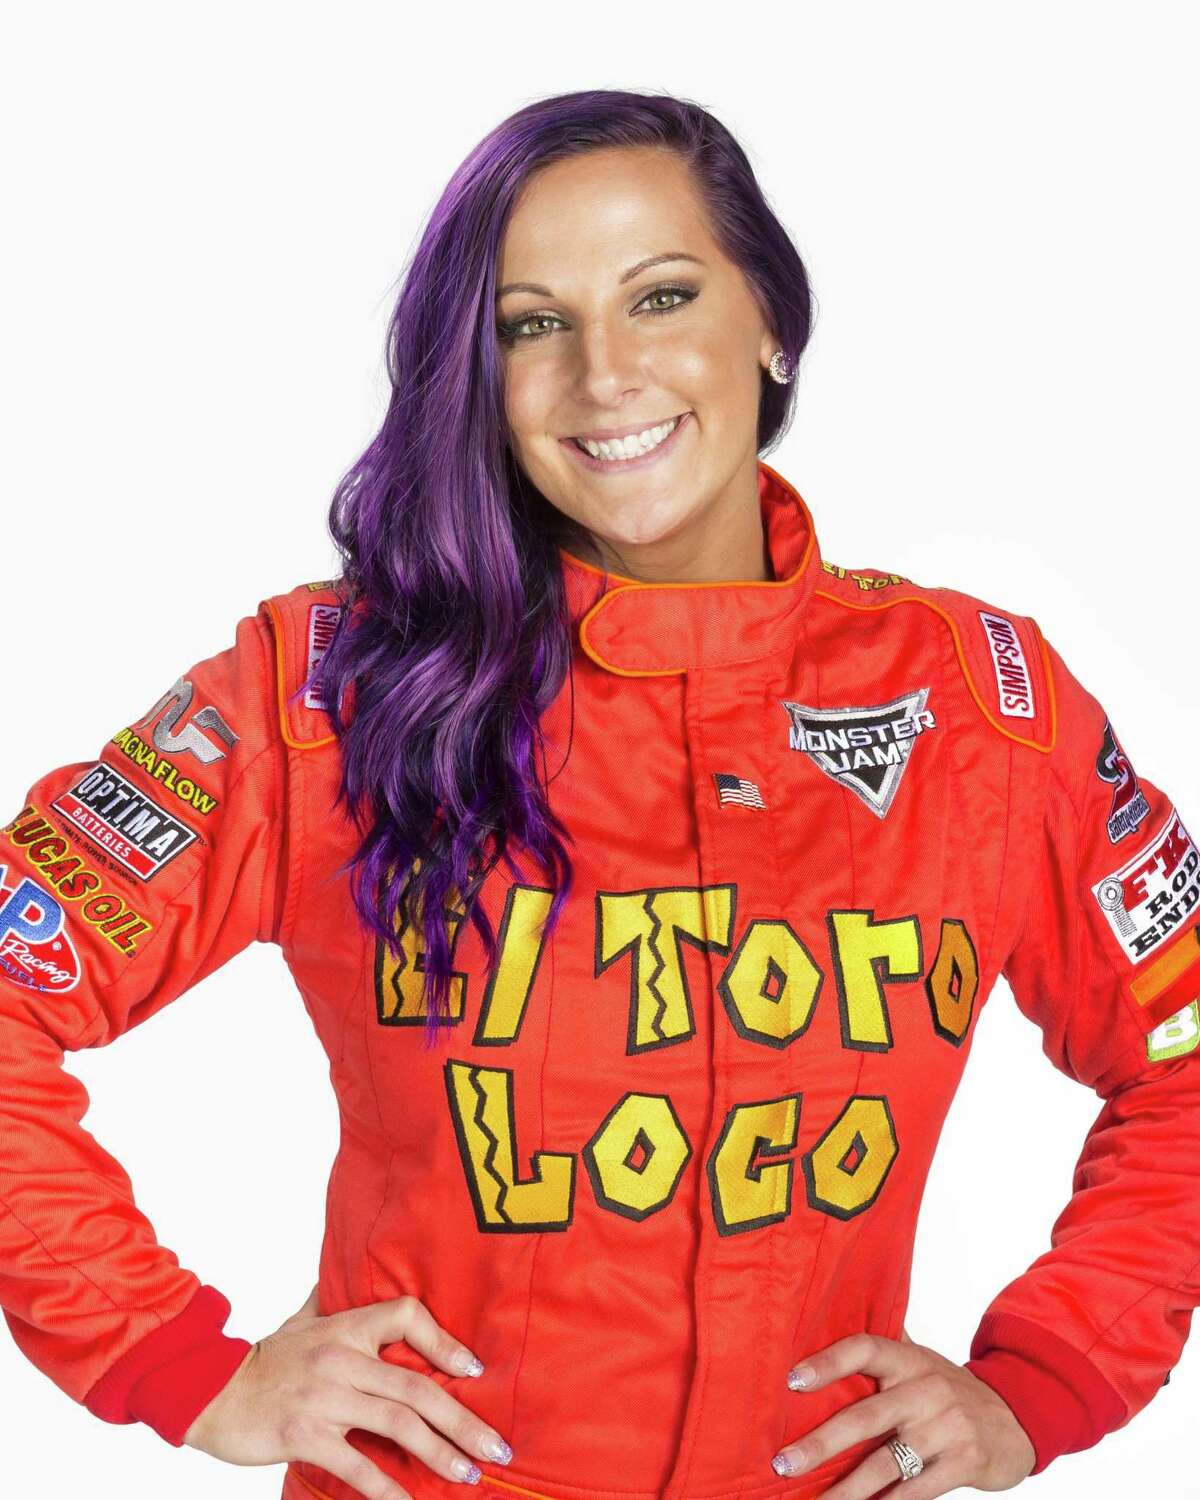 Kayla Blood will be driving El Toro Loco when Monster Jam marks its 10th anniversary in Bridgeport at Webster Bank Arena Oct. 26-28.